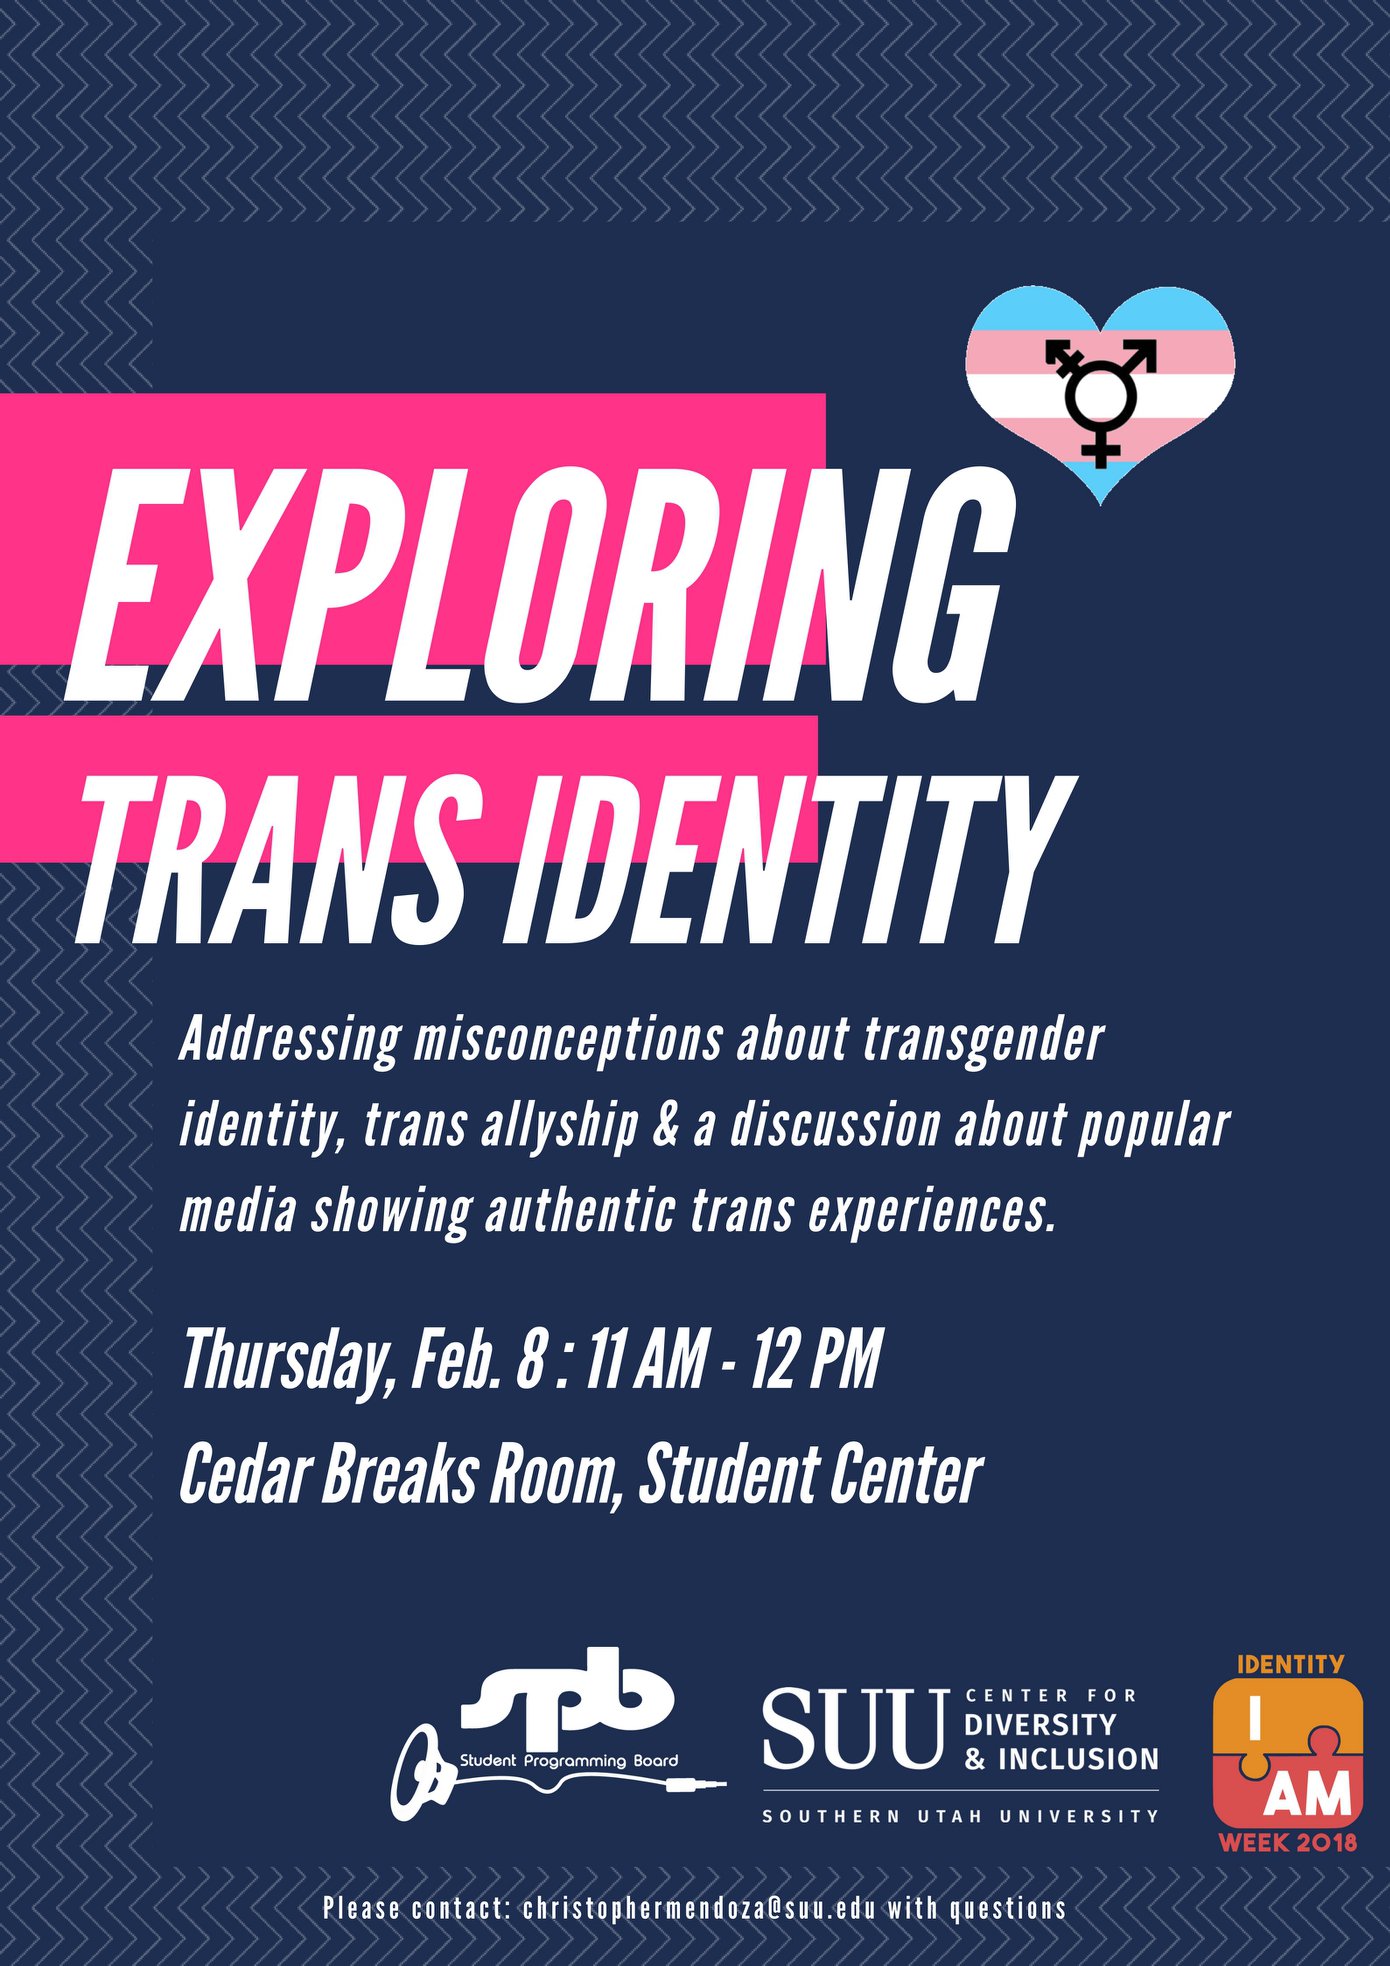 Exploring Trans Identity. Addressing misconceptions about transgender identity, trans allyship & discussion about popular media showin authentic trans experiences.